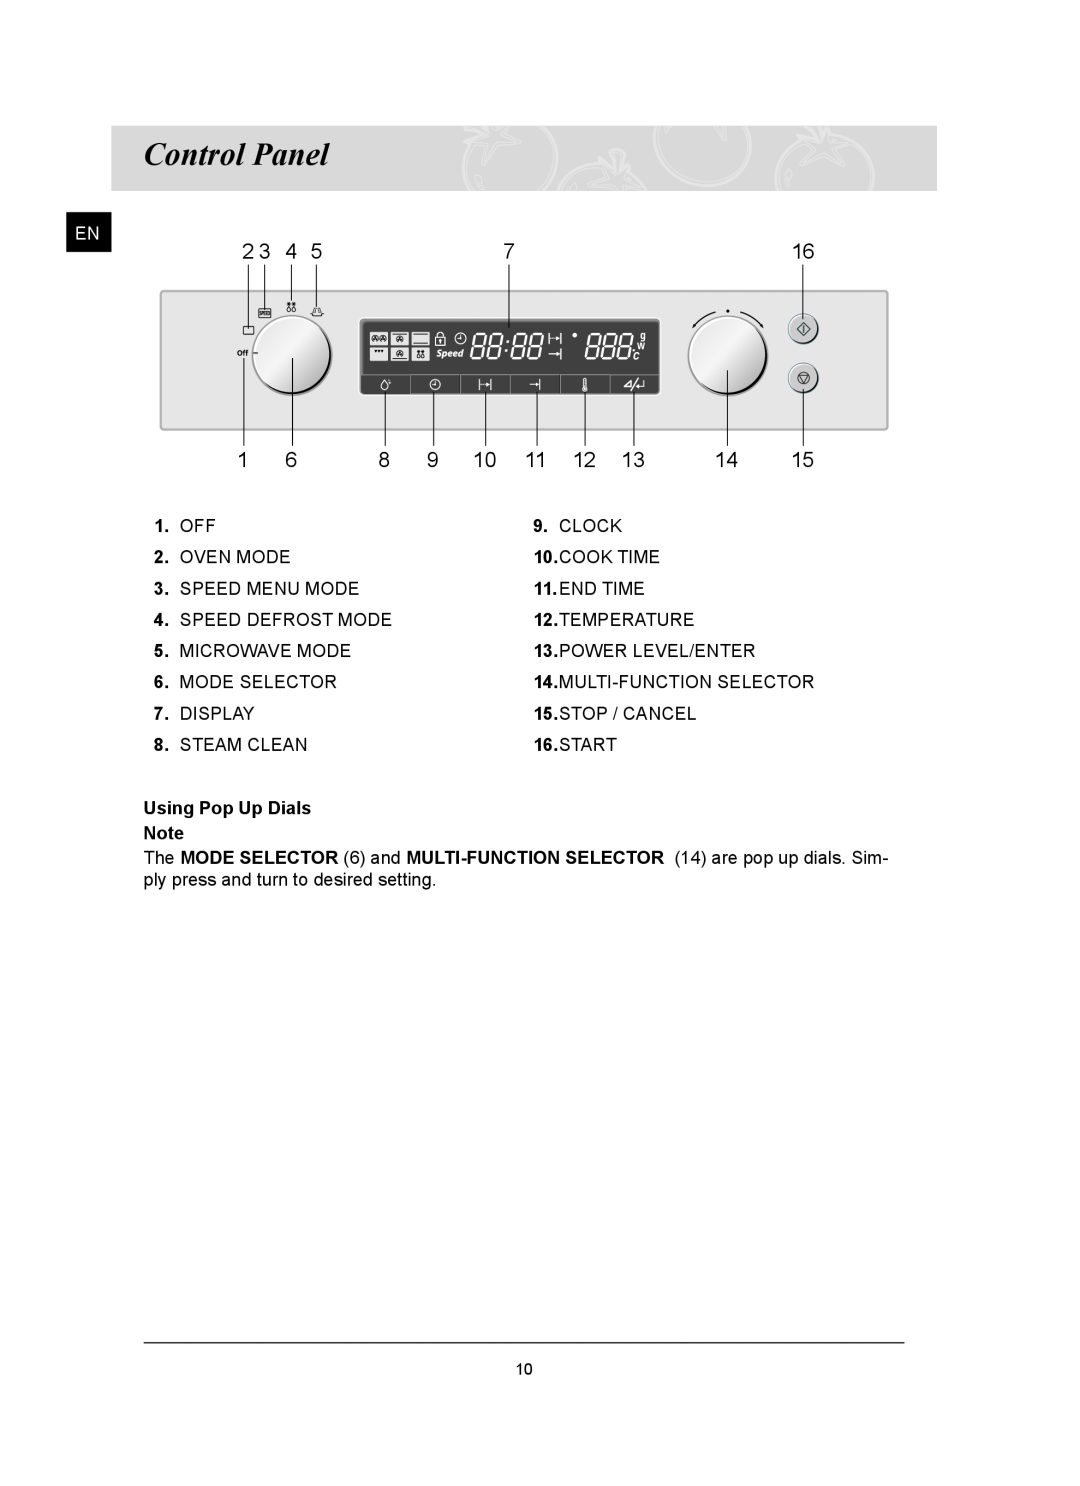 Samsung FQ159UST, FQ159ST owner manual Control Panel, Using Pop Up Dials 